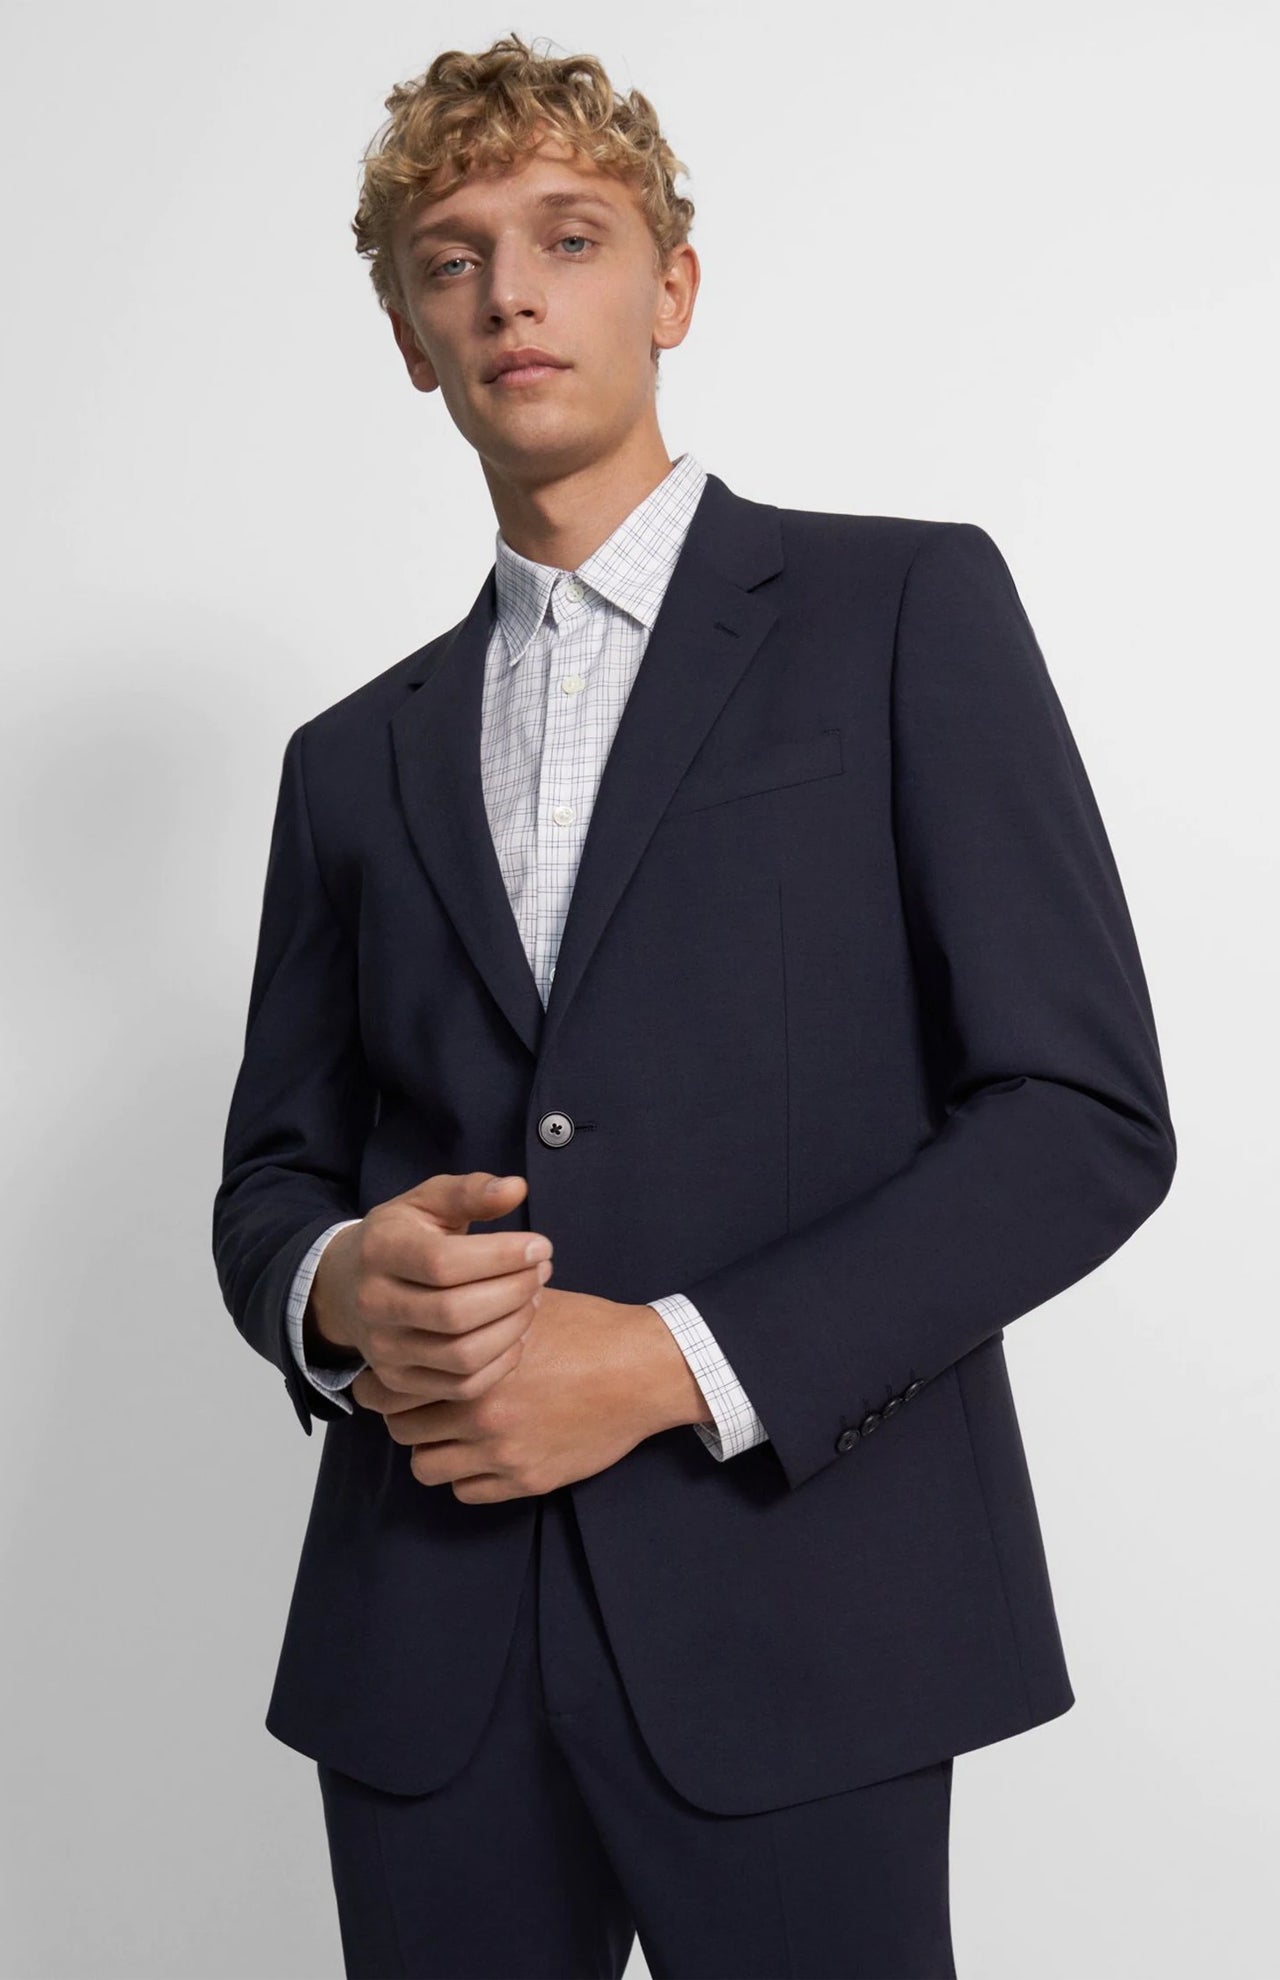 Theory Chambers New Tailor 2 Suit Jacket Navy Front Model Image (1737077162099)